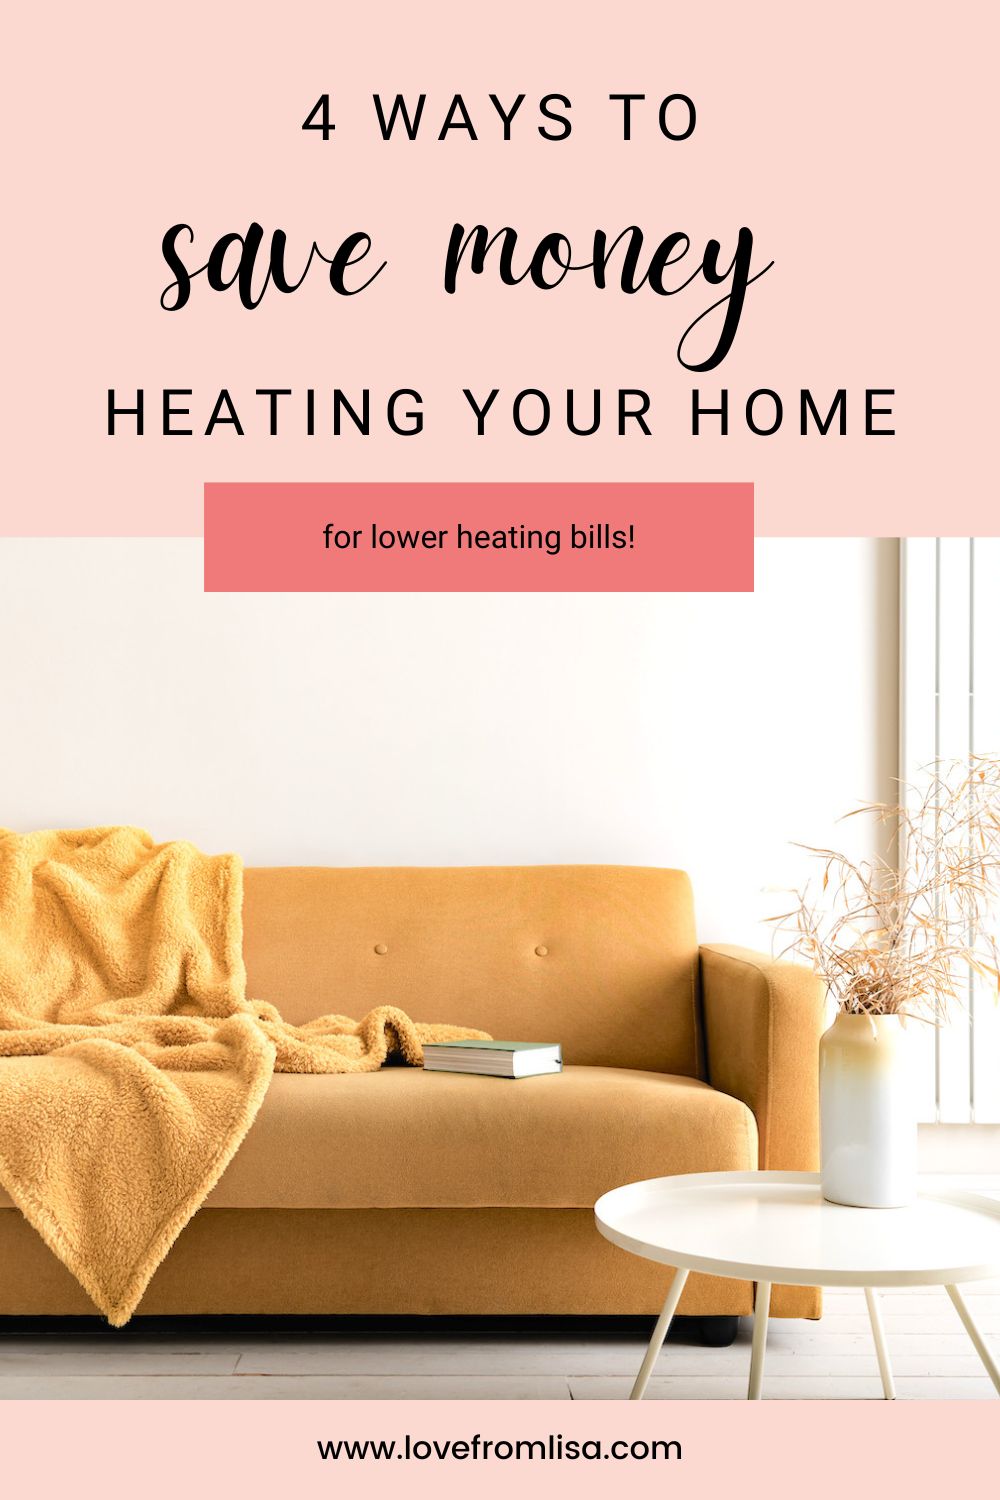 4 ways to save money heating your home in winter Pinterest graphic